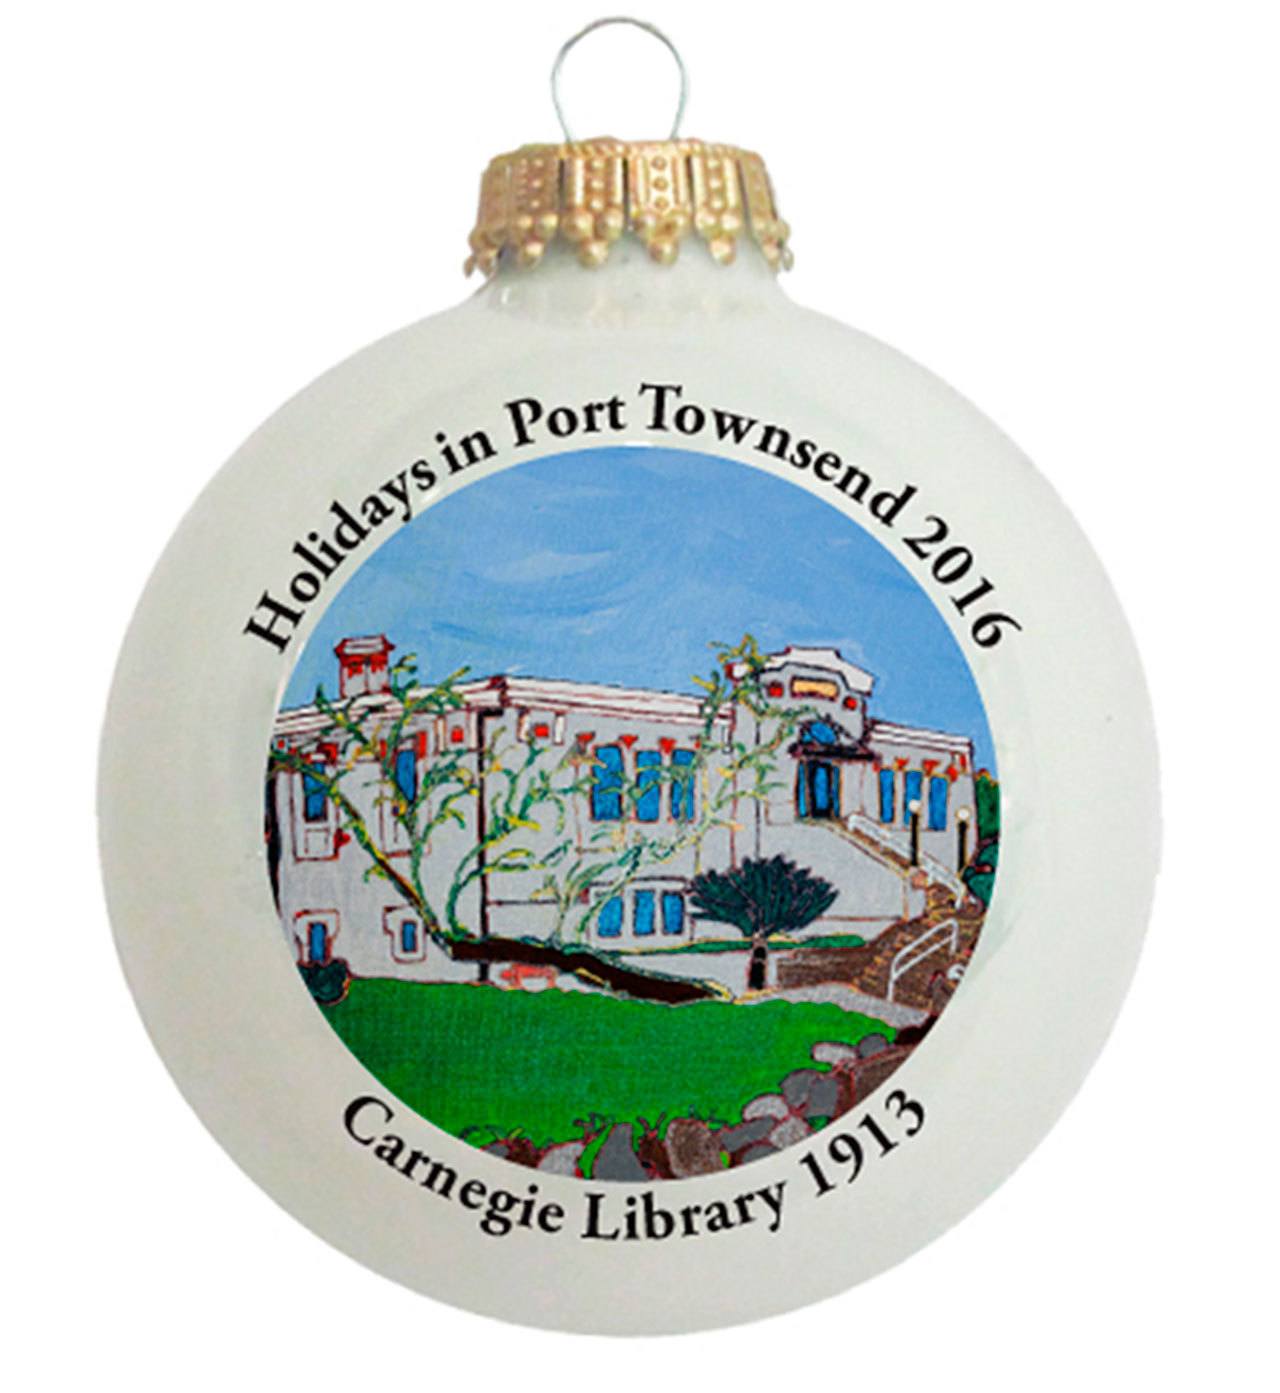 The 2016 Port Townsend Main Street Christmas ornament features the Carnegie Library in uptown Port Townsend.